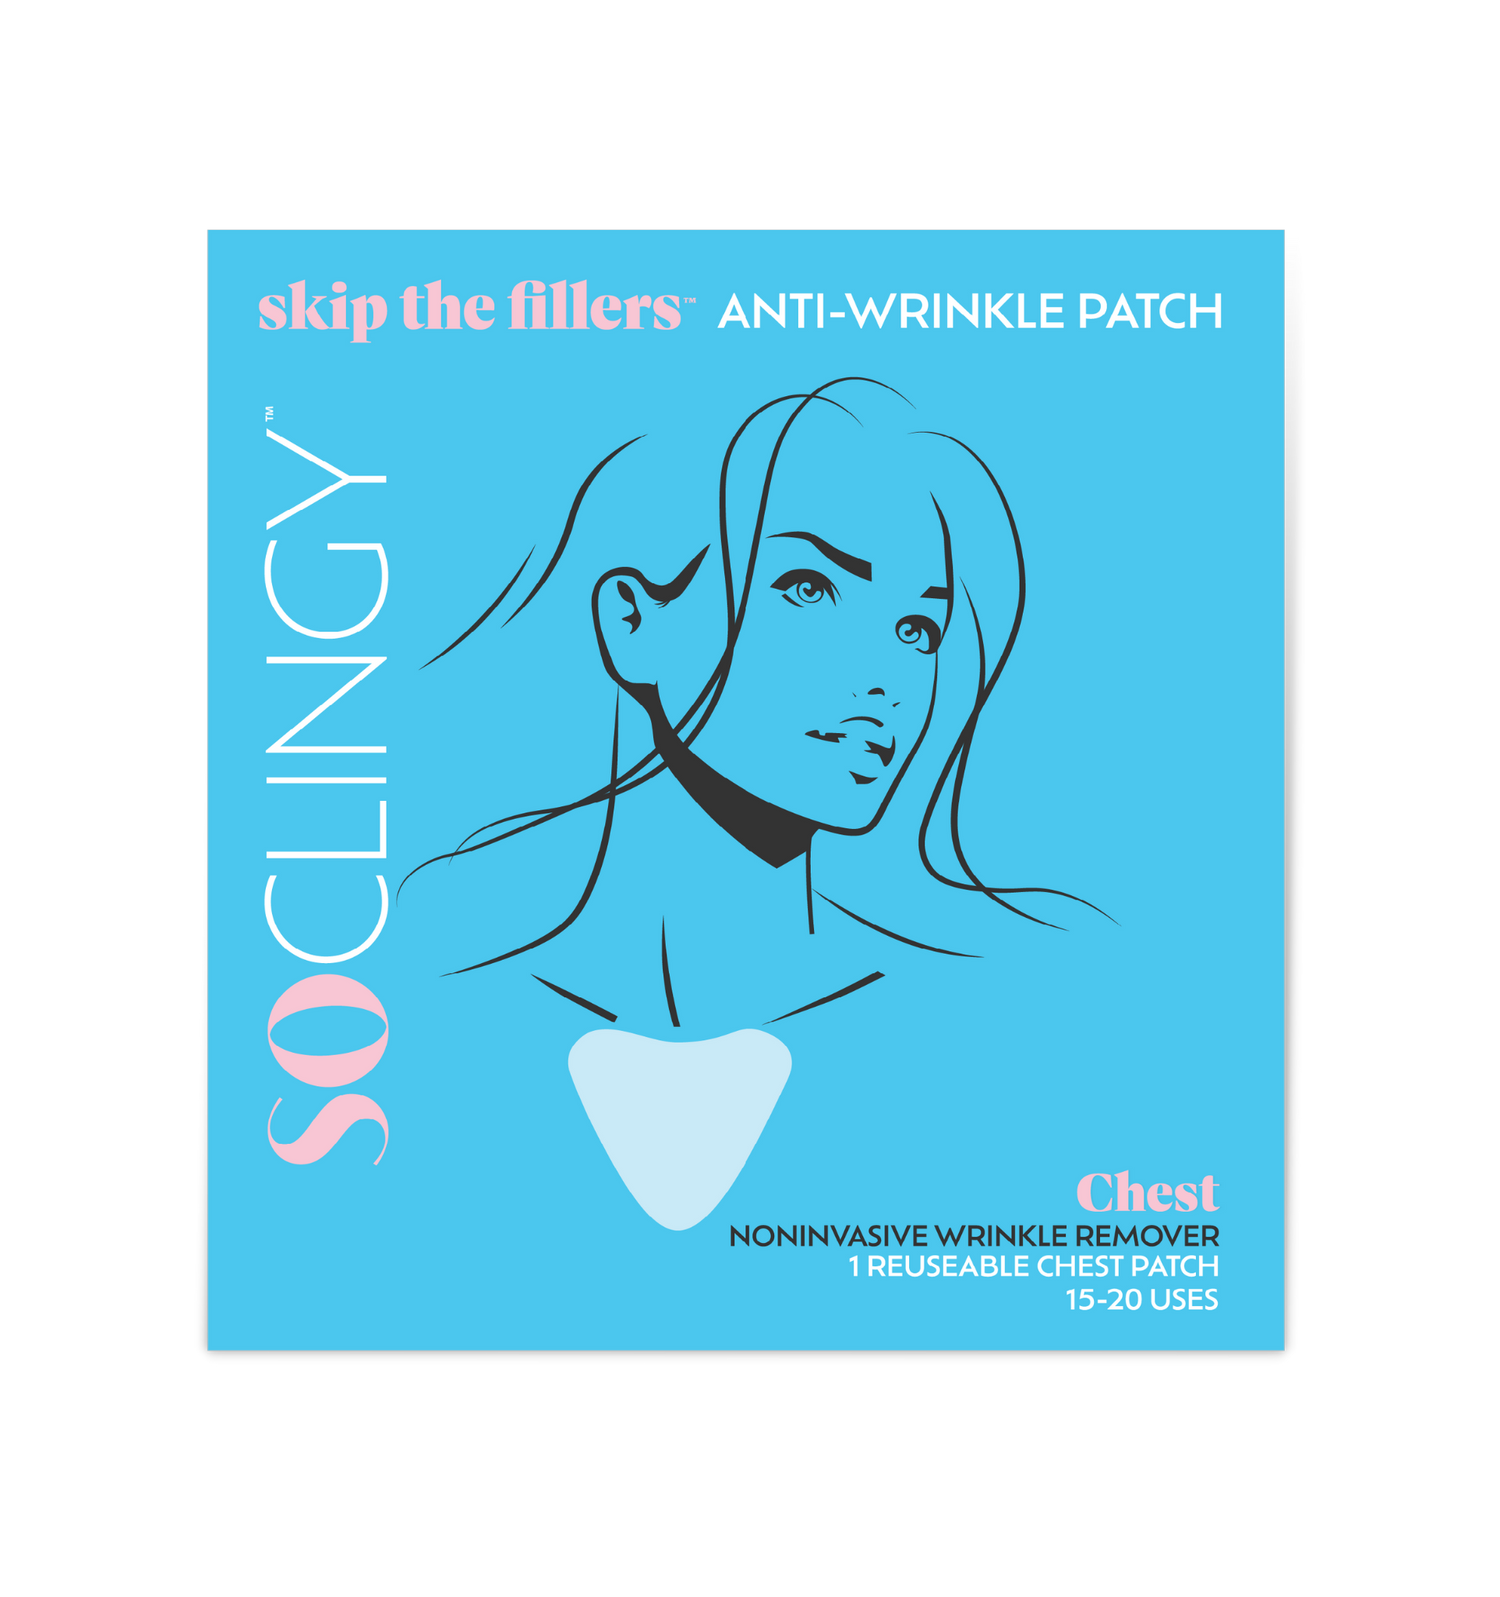 This anti aging silicone patch smooths morning chest wrinkles. It is a better alternative to medical intervention. It smooths skin in 3 hours or less.